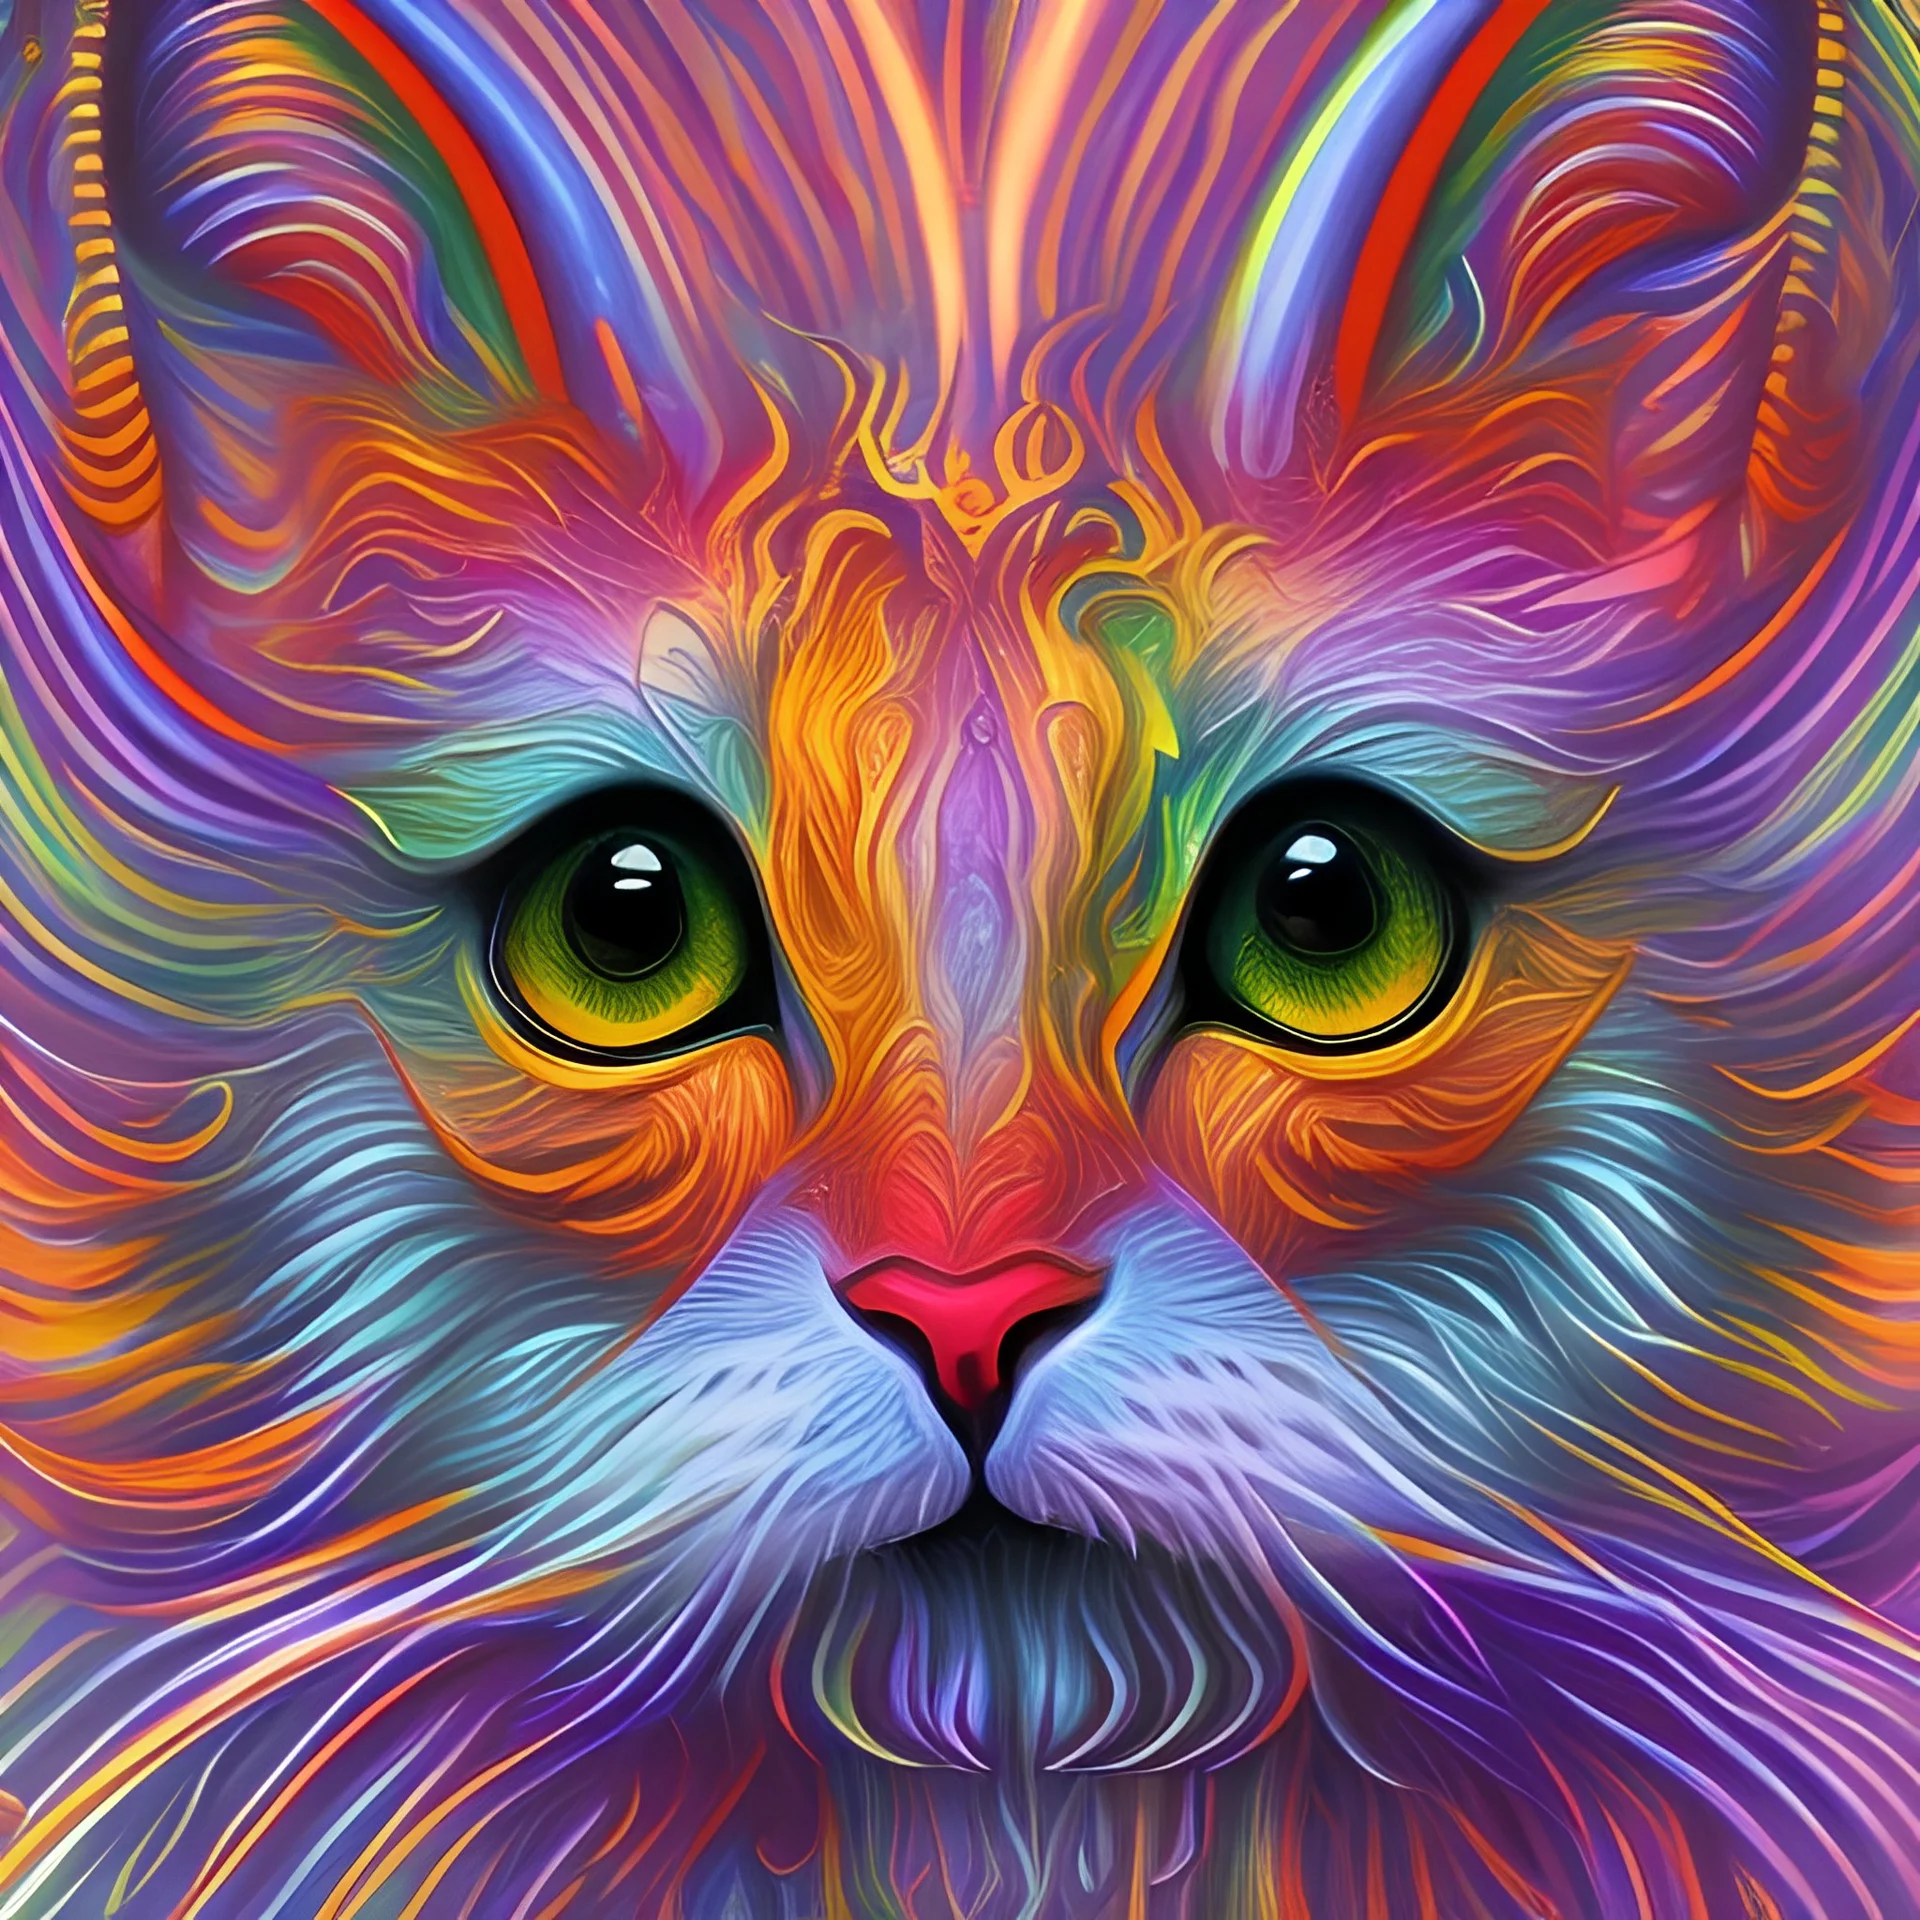 lisa frank style huge eyes with rainbow inside them small girl crying